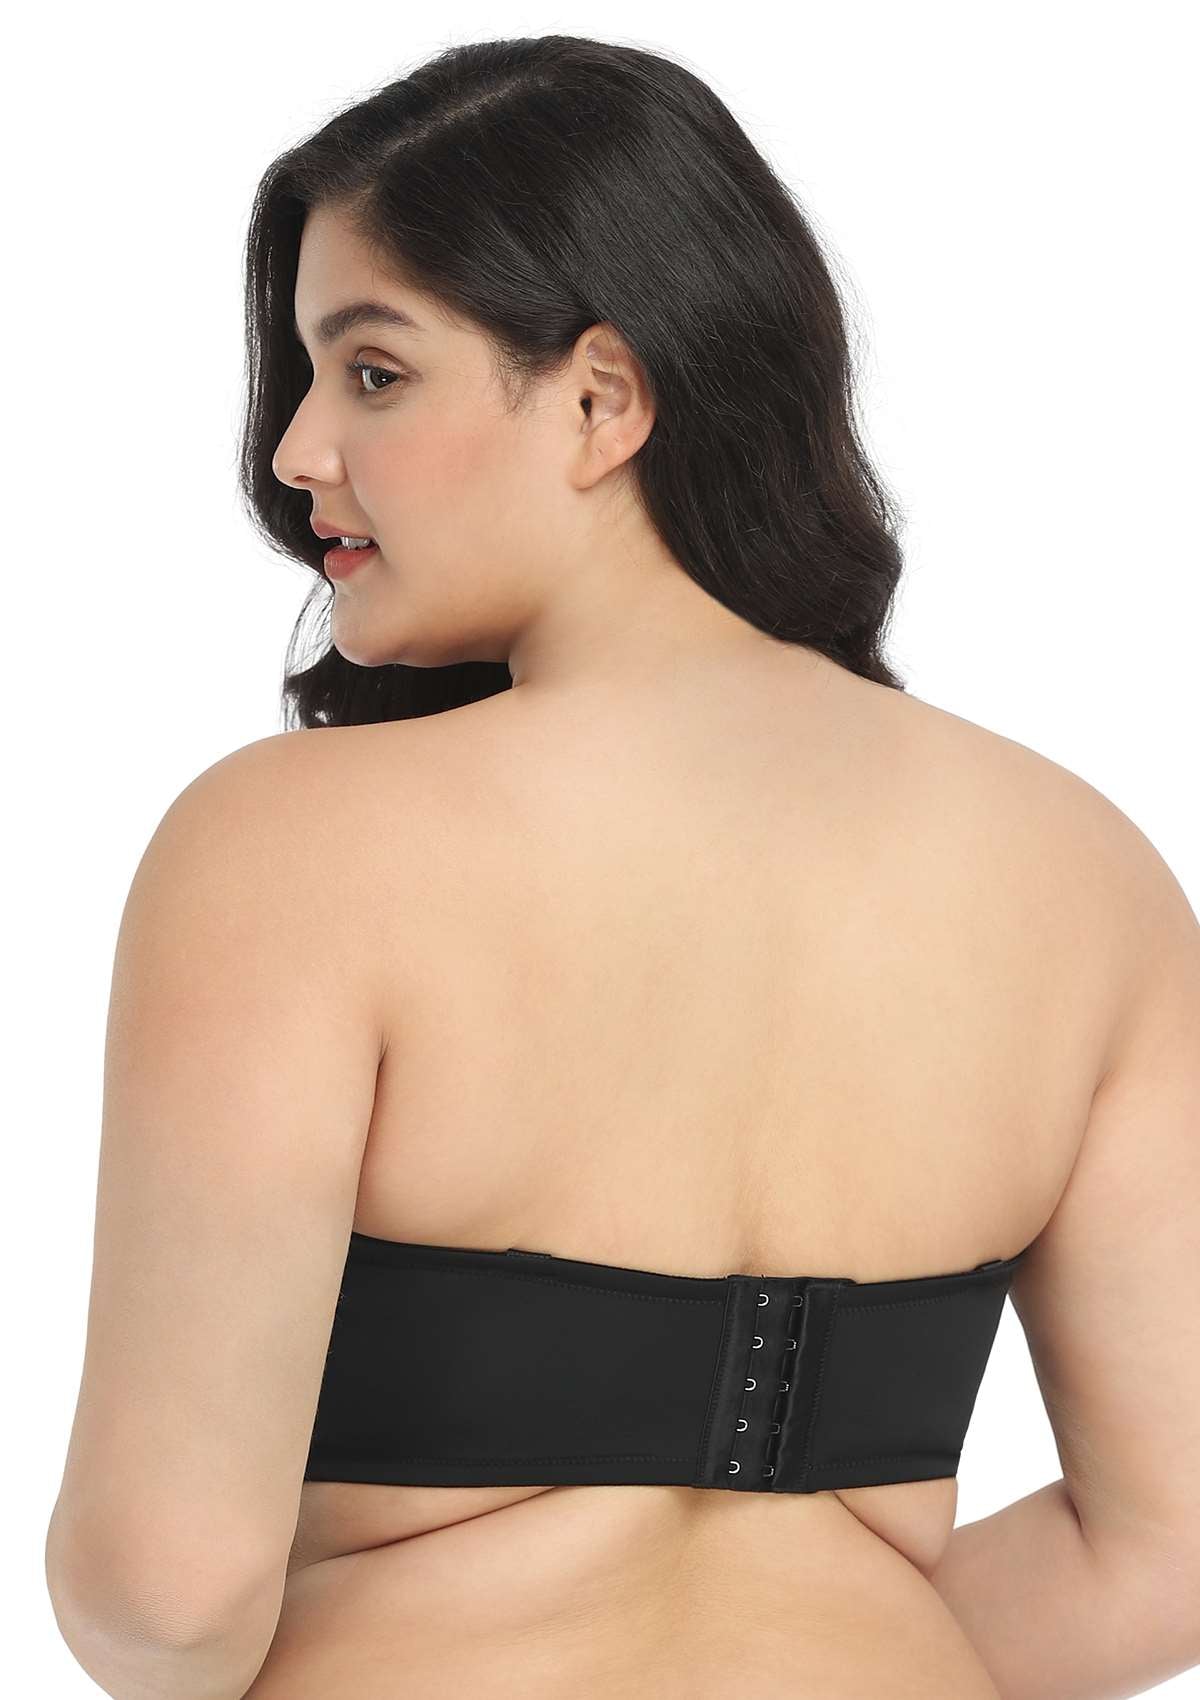 HSIA Margaret Molded Convertible Multiway Classic Strapless Bra - Black / 38 / G